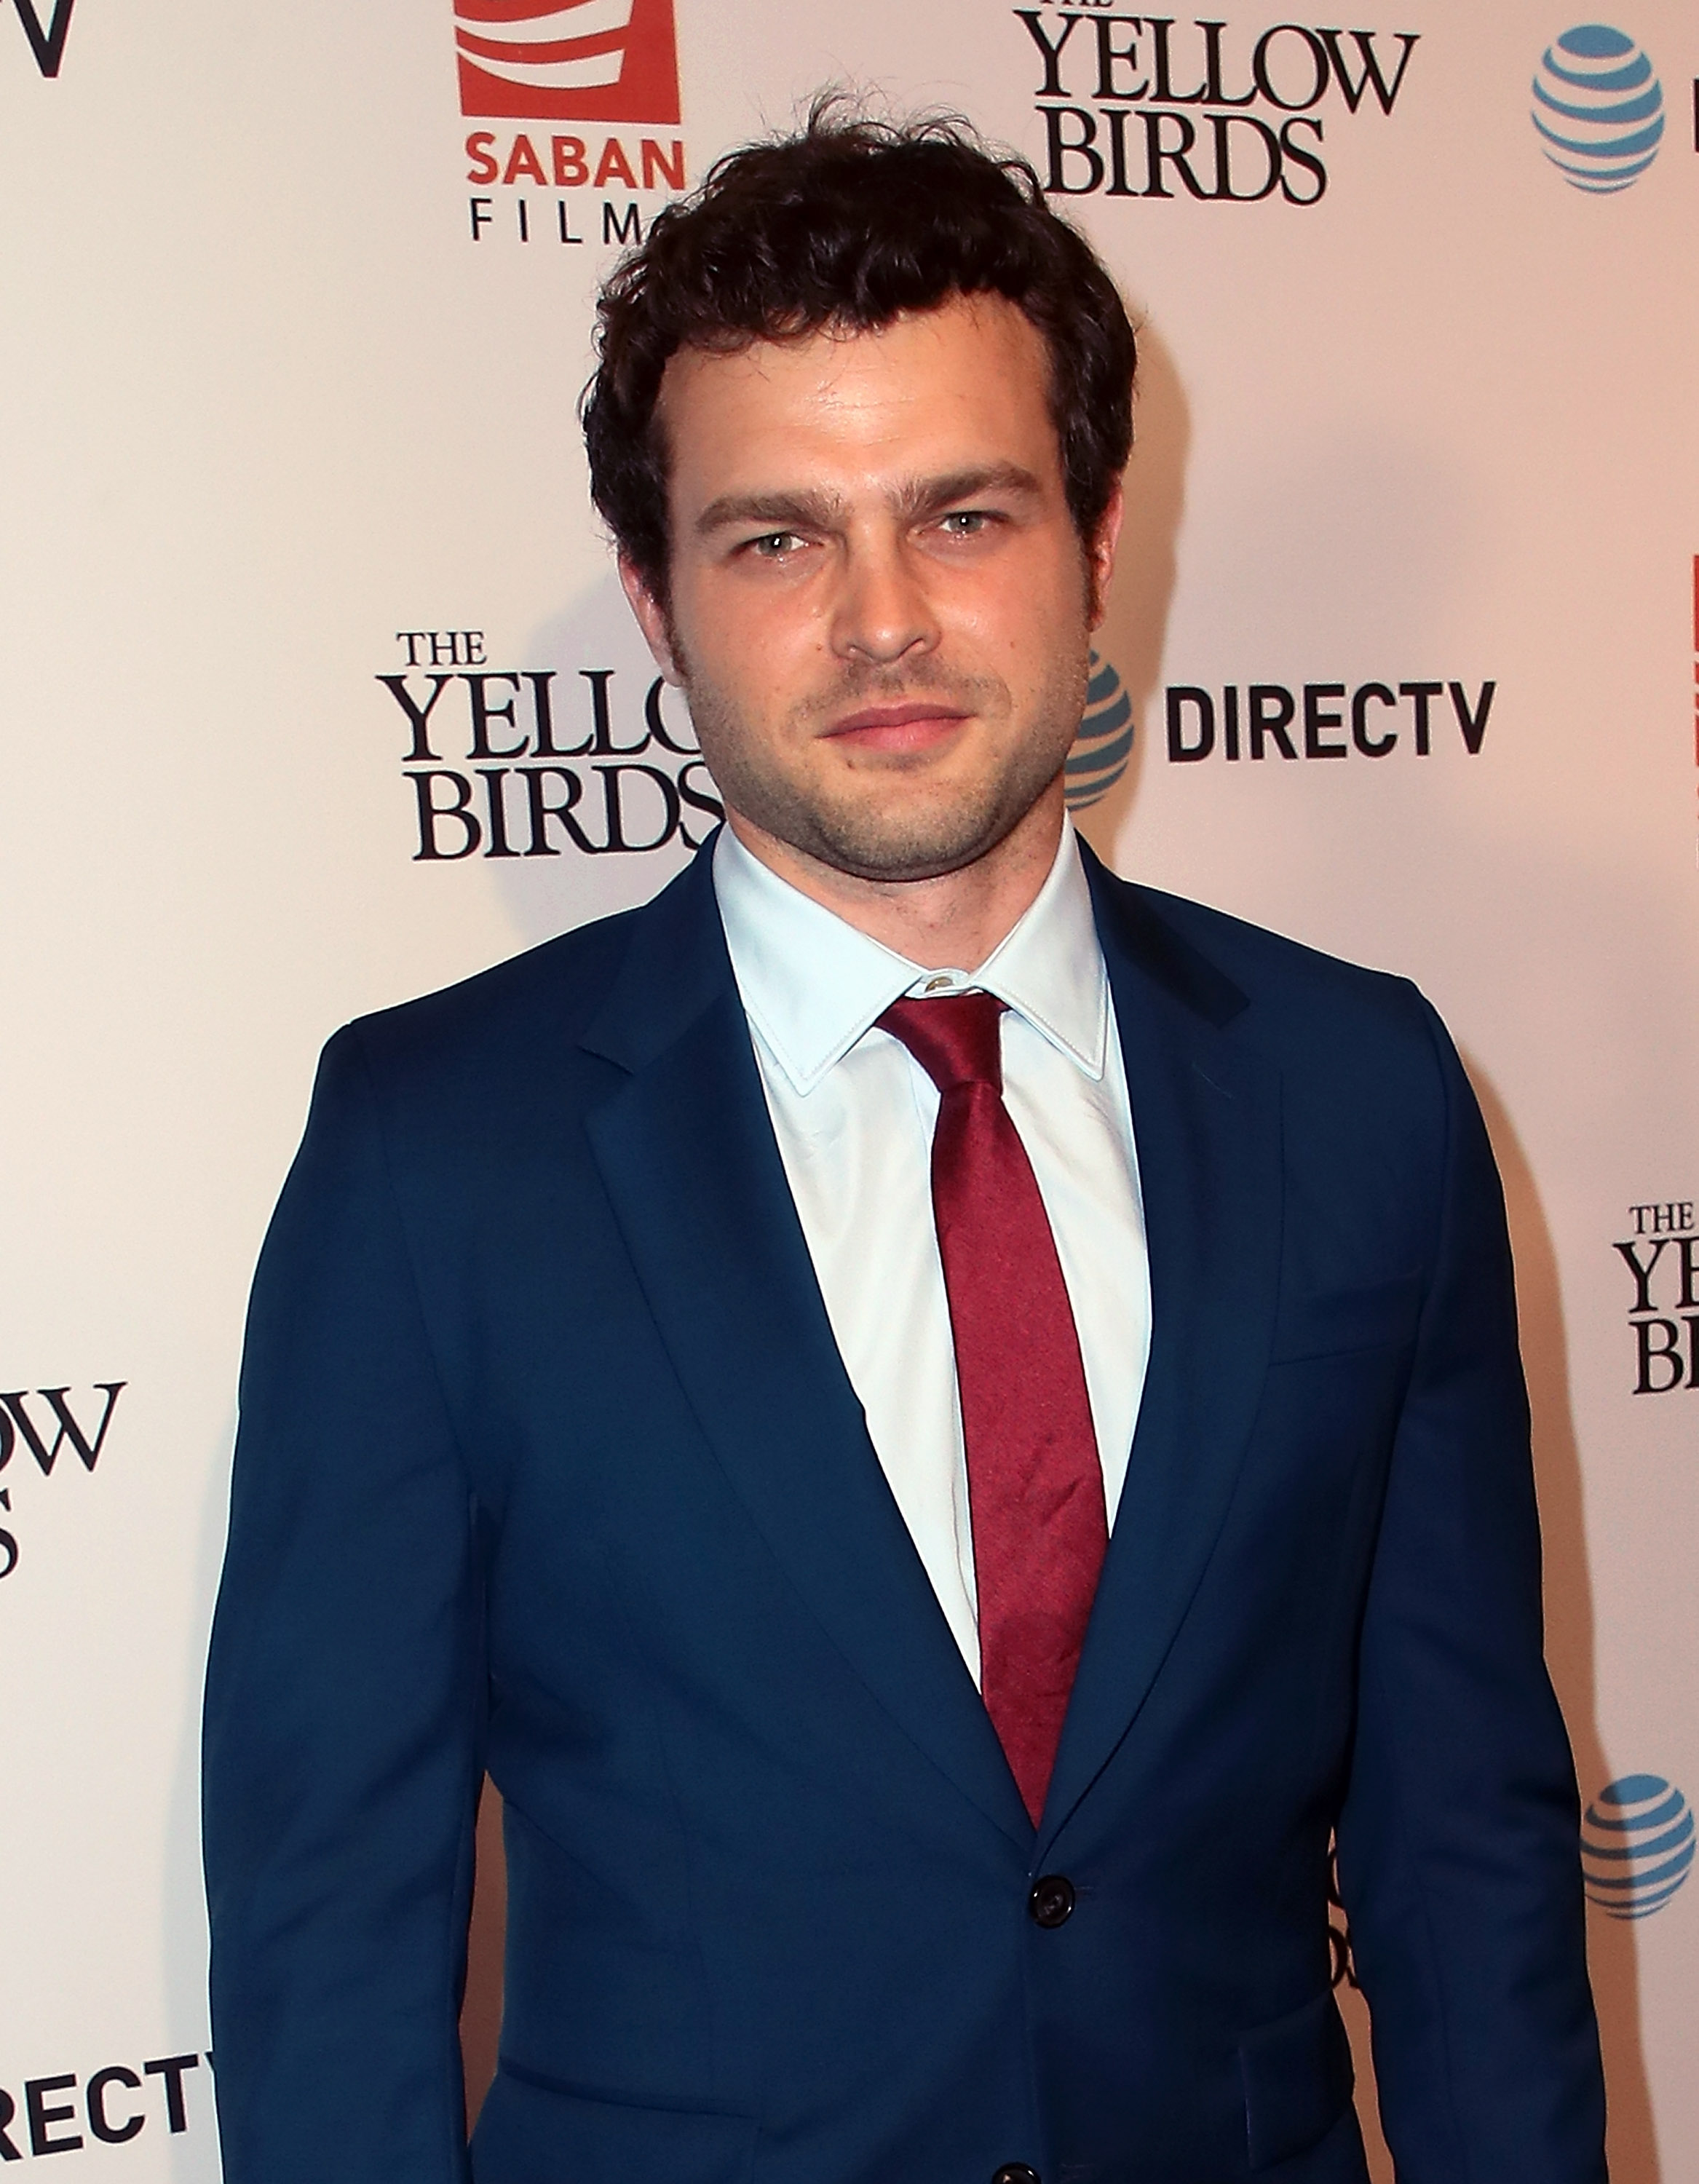 Alden Ehrenreich attends Saban Films' and DirecTV's special screening of "Yellow Birds" at The London Screening Room on June 6, 2018, in West Hollywood, California. | Source: Getty Images